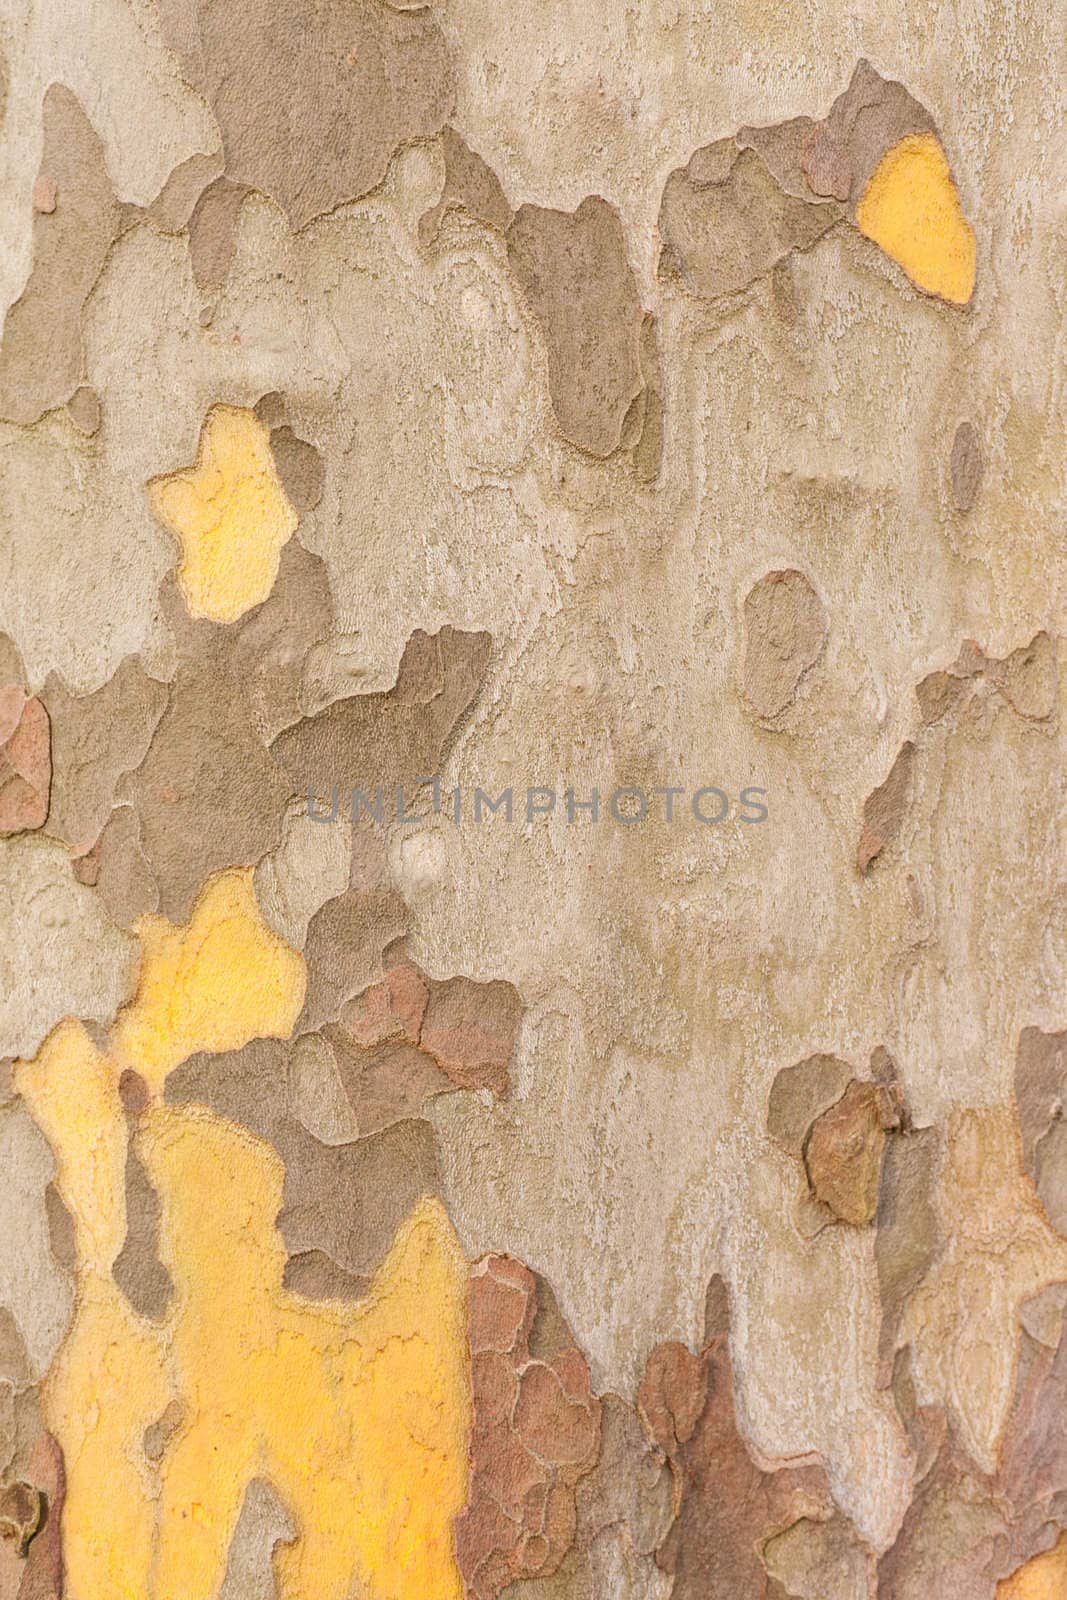 Planetree Bark Background by PiLens